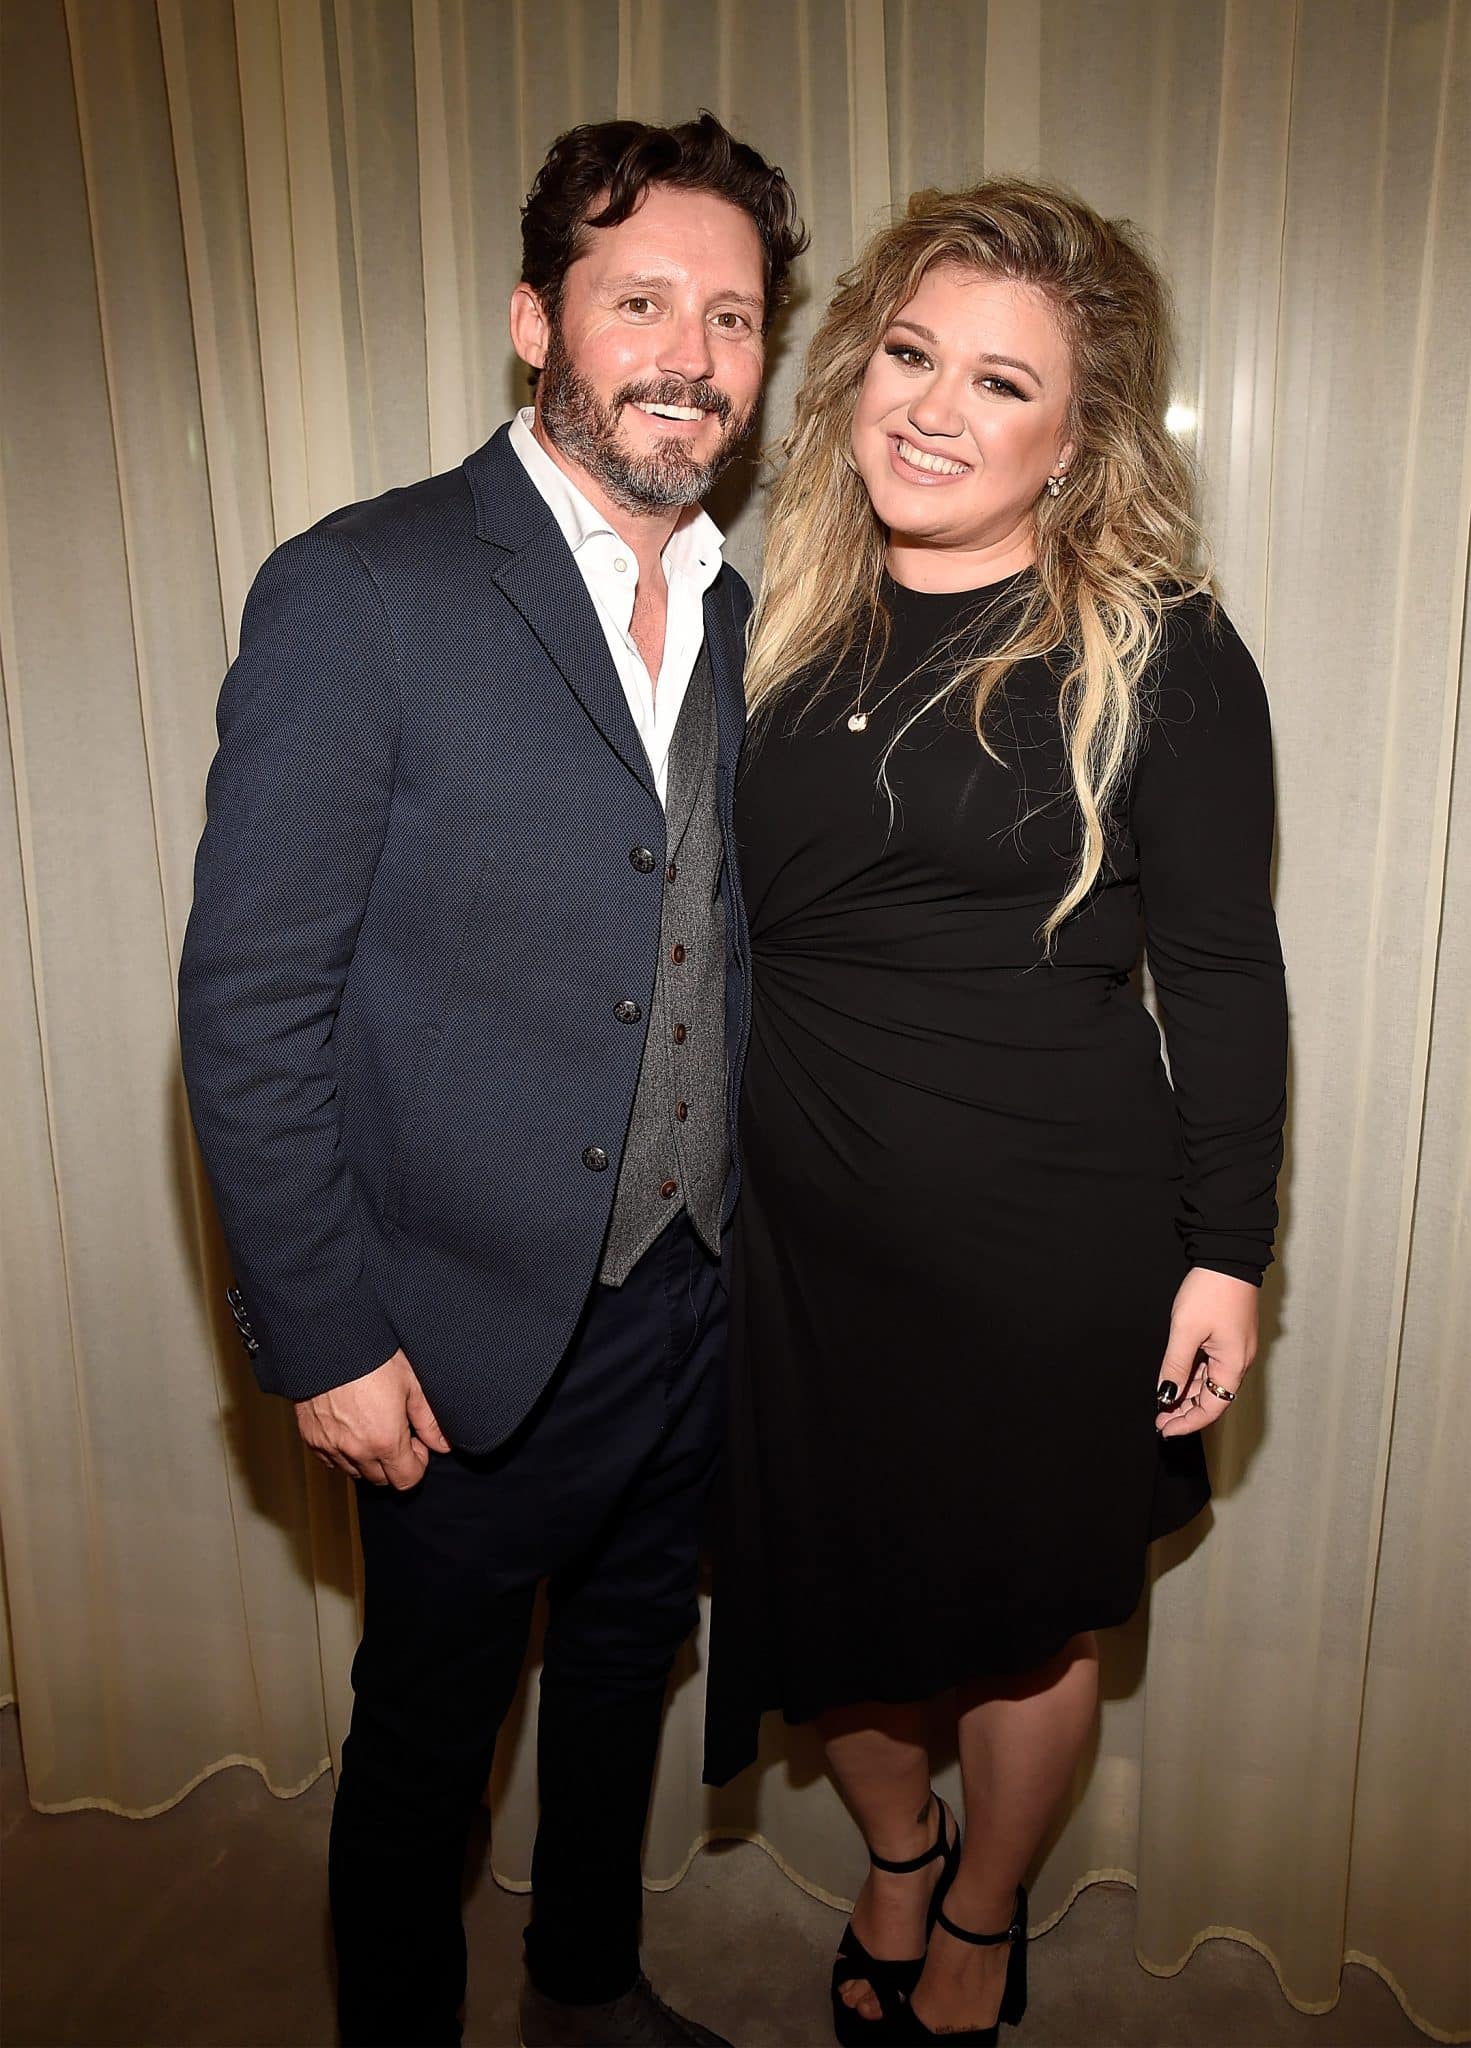 NEW YORK, NY - SEPTEMBER 06: (Exclusive Coverage) Brandon Blackstock and Kelly Clarkson backstage after she performed songs from her new album "The Meaning of Life" at The Rainbow Room on September 6, 2017 in New York City. (Photo by Kevin Mazur/Getty Images for Atlantic Records)